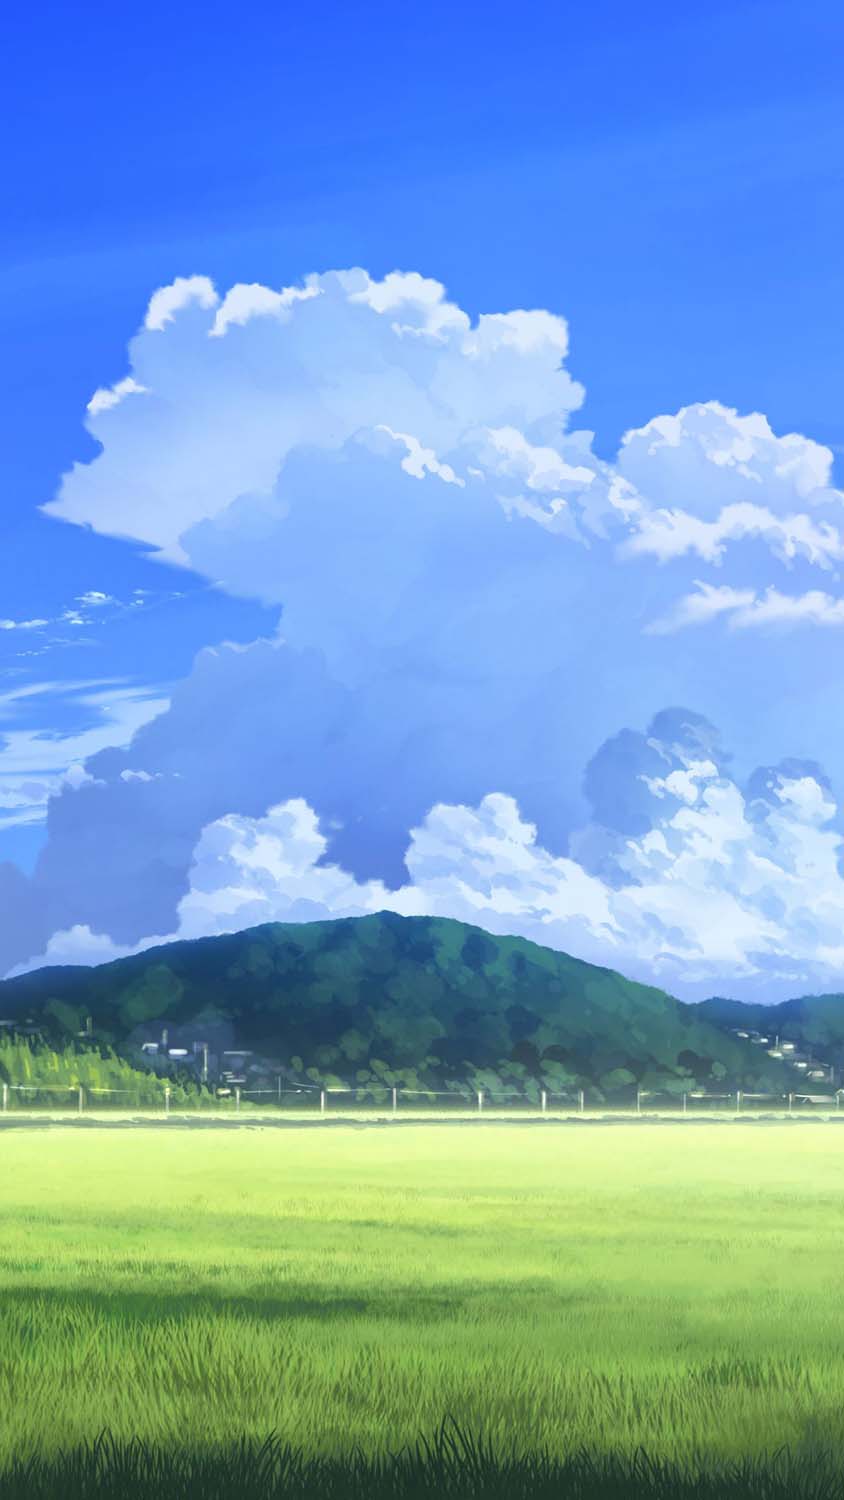 A painting of an open field with clouds - Nature